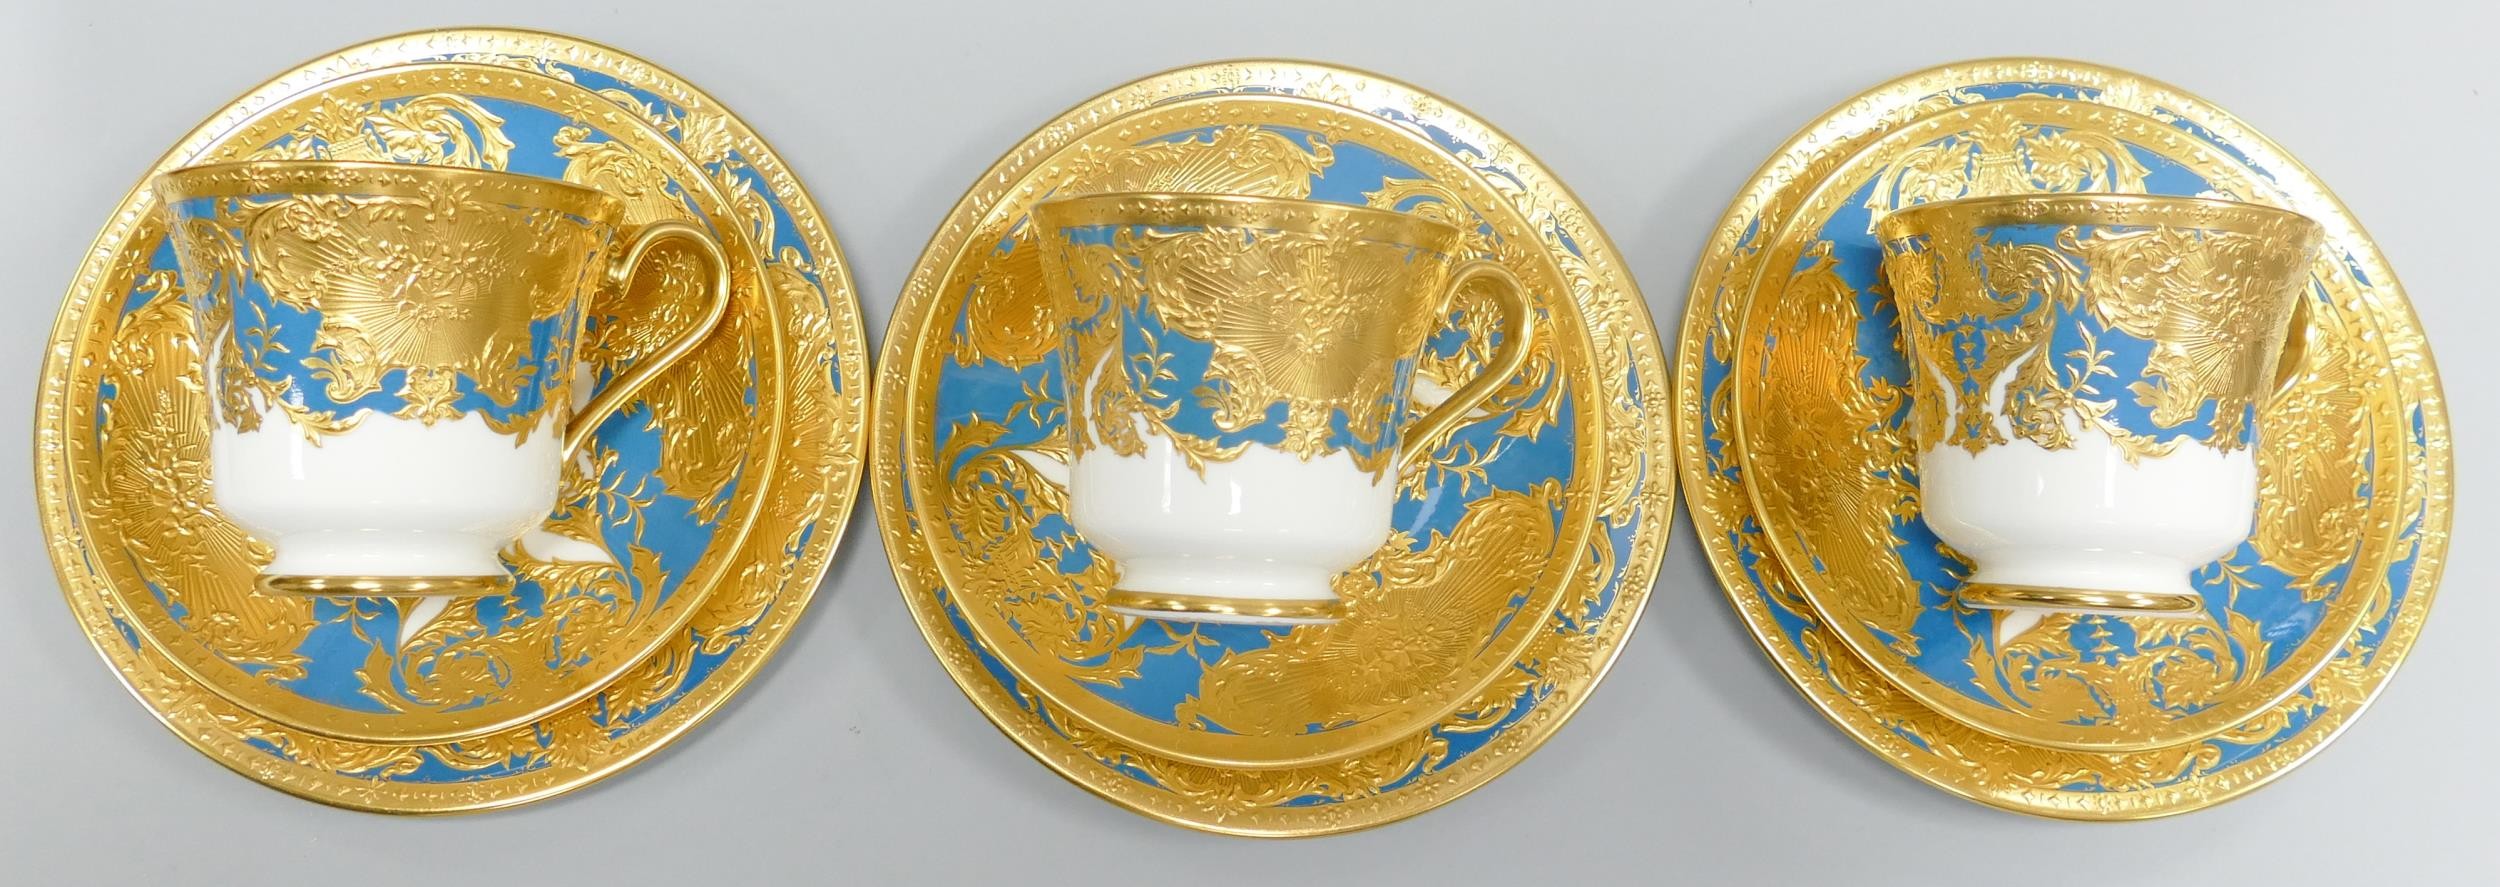 De Lamerie Fine Bone China heavily gilded Blue Royale patterned trios, specially made high end - Image 3 of 3